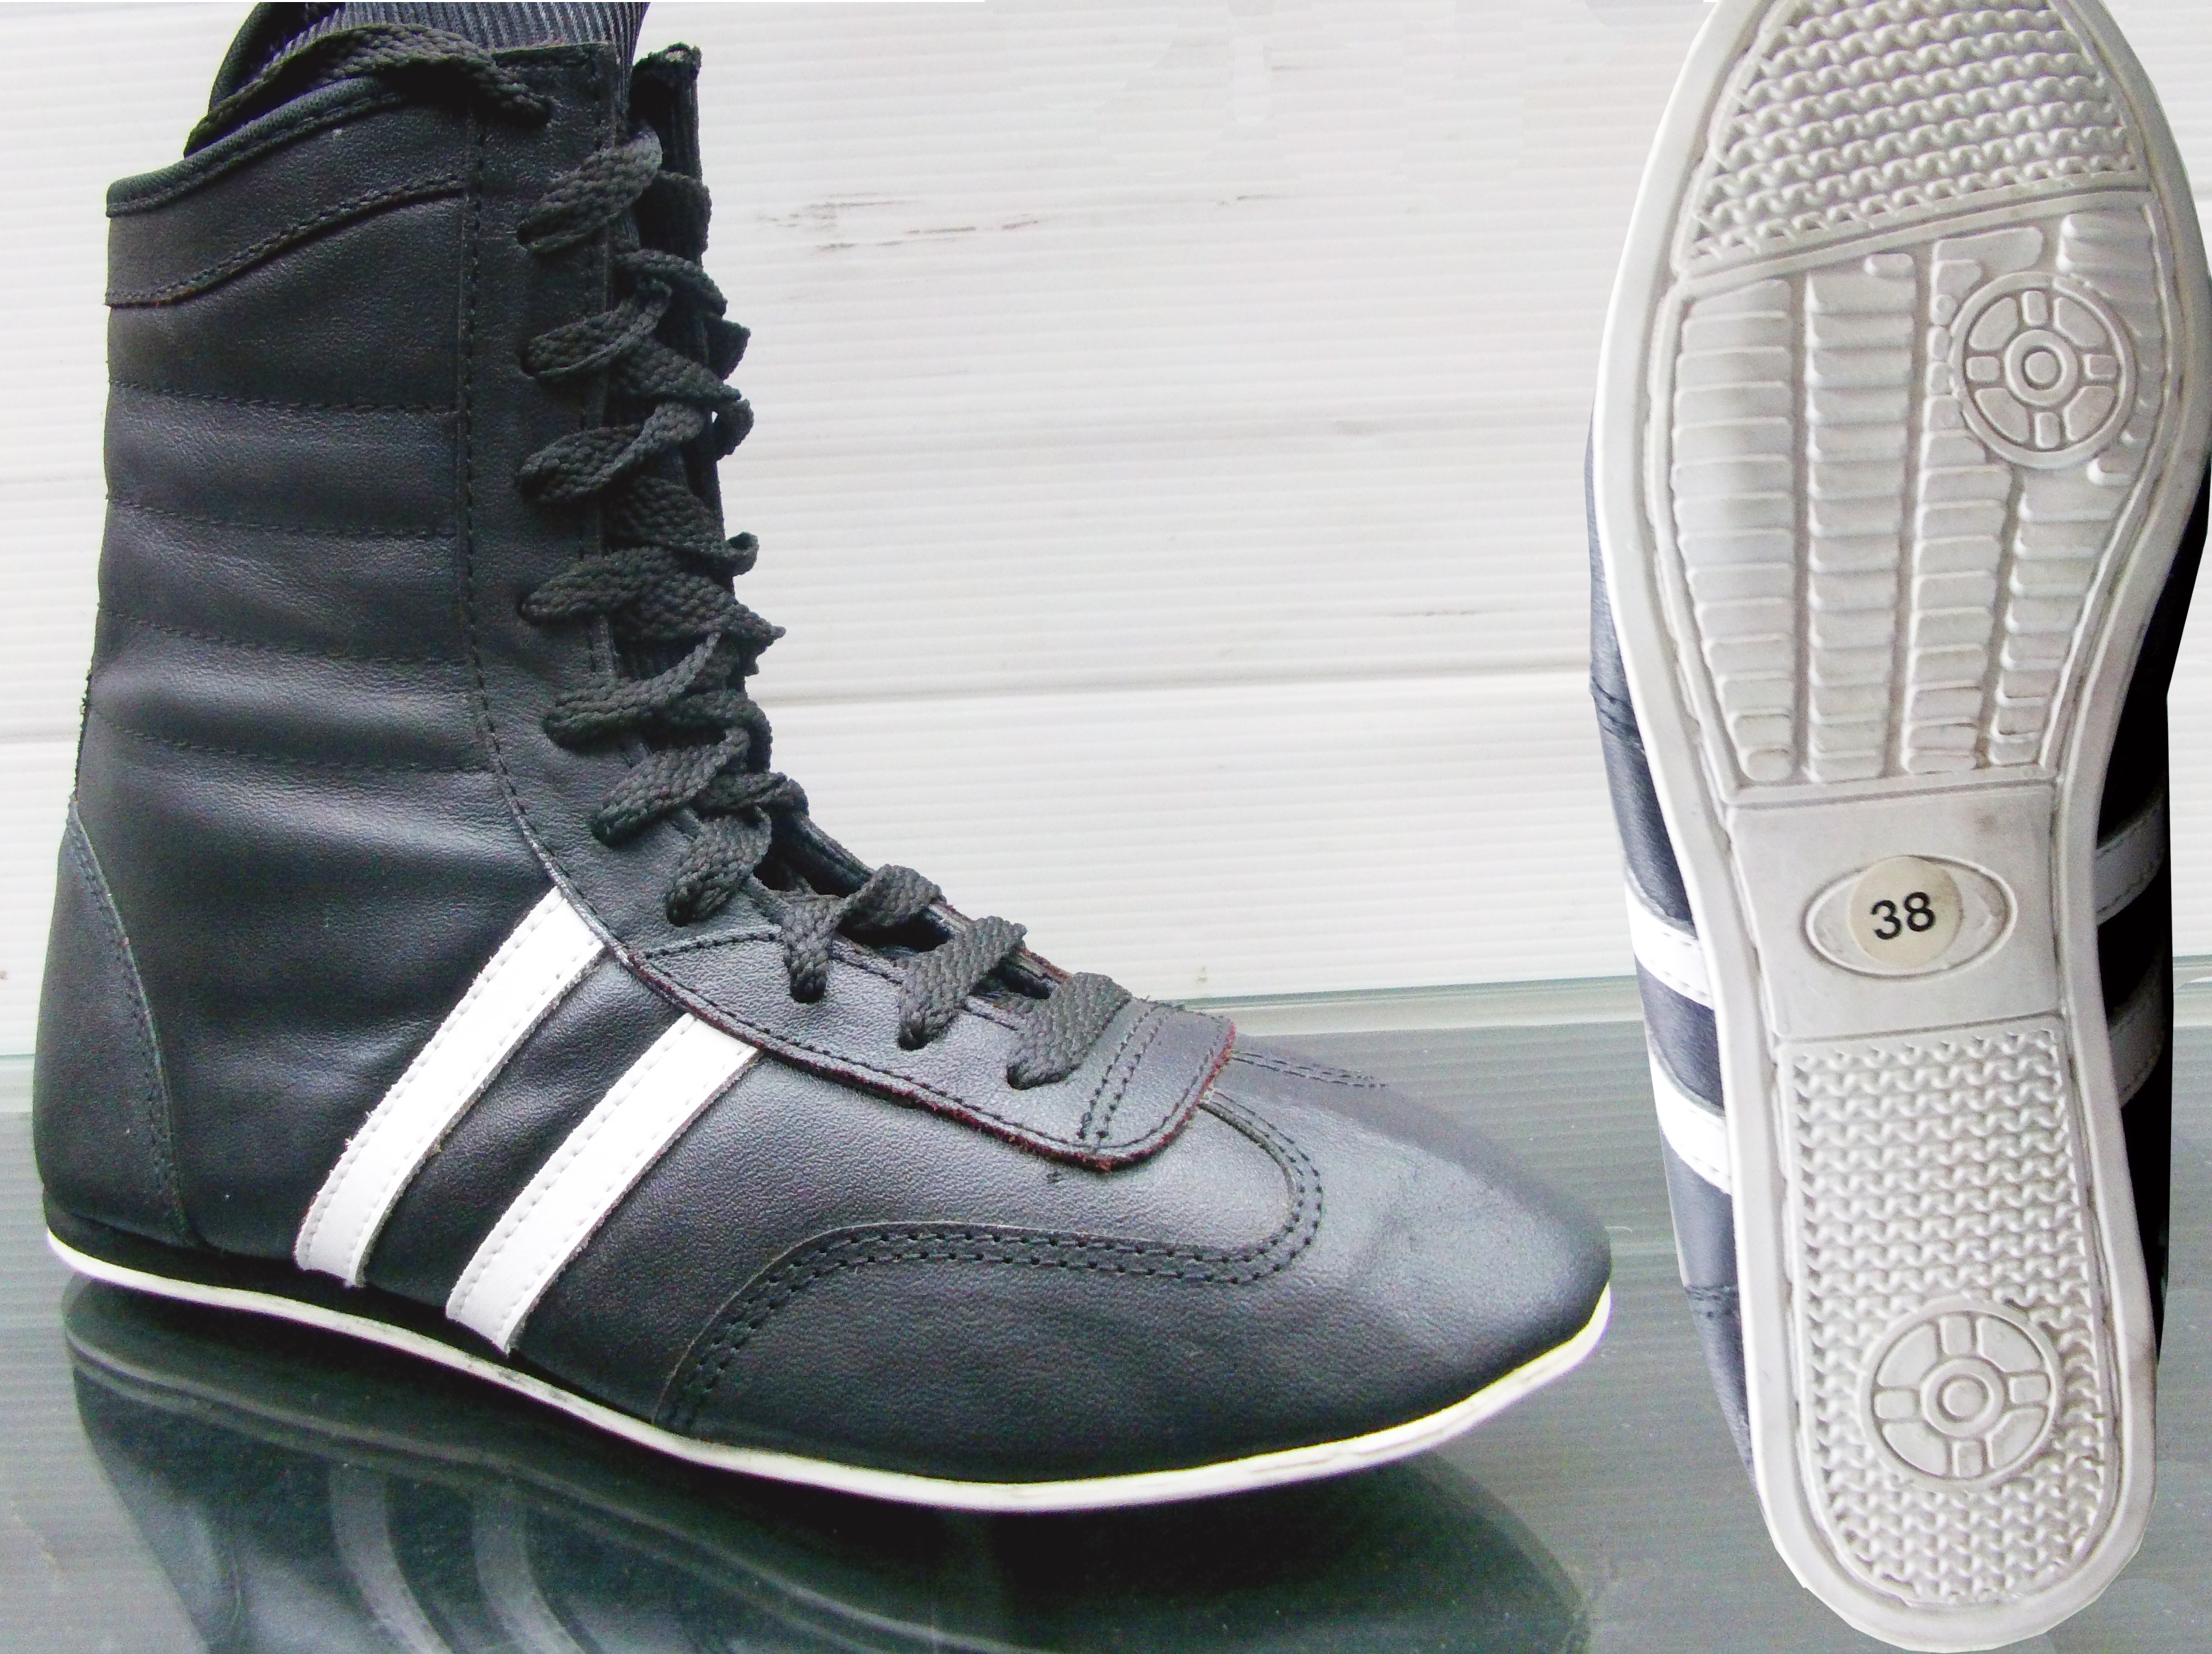 Boxing Boot PU leather Was £ 35.00 Now £ 19.99 only